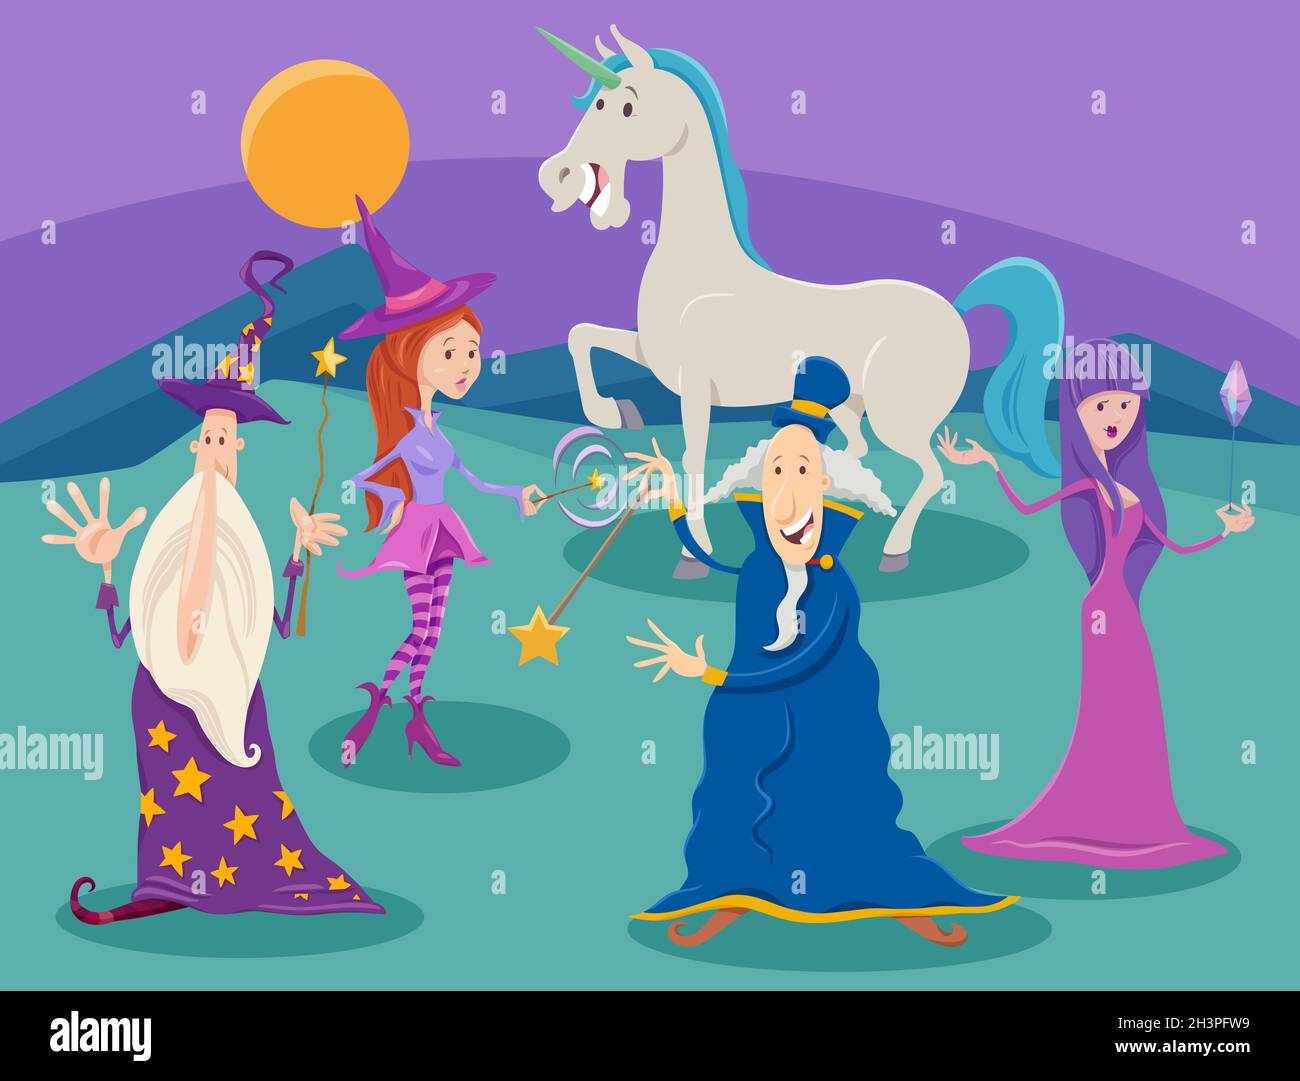 Cartoon wizards and witches with unicorn fantasy characters Stock Photo